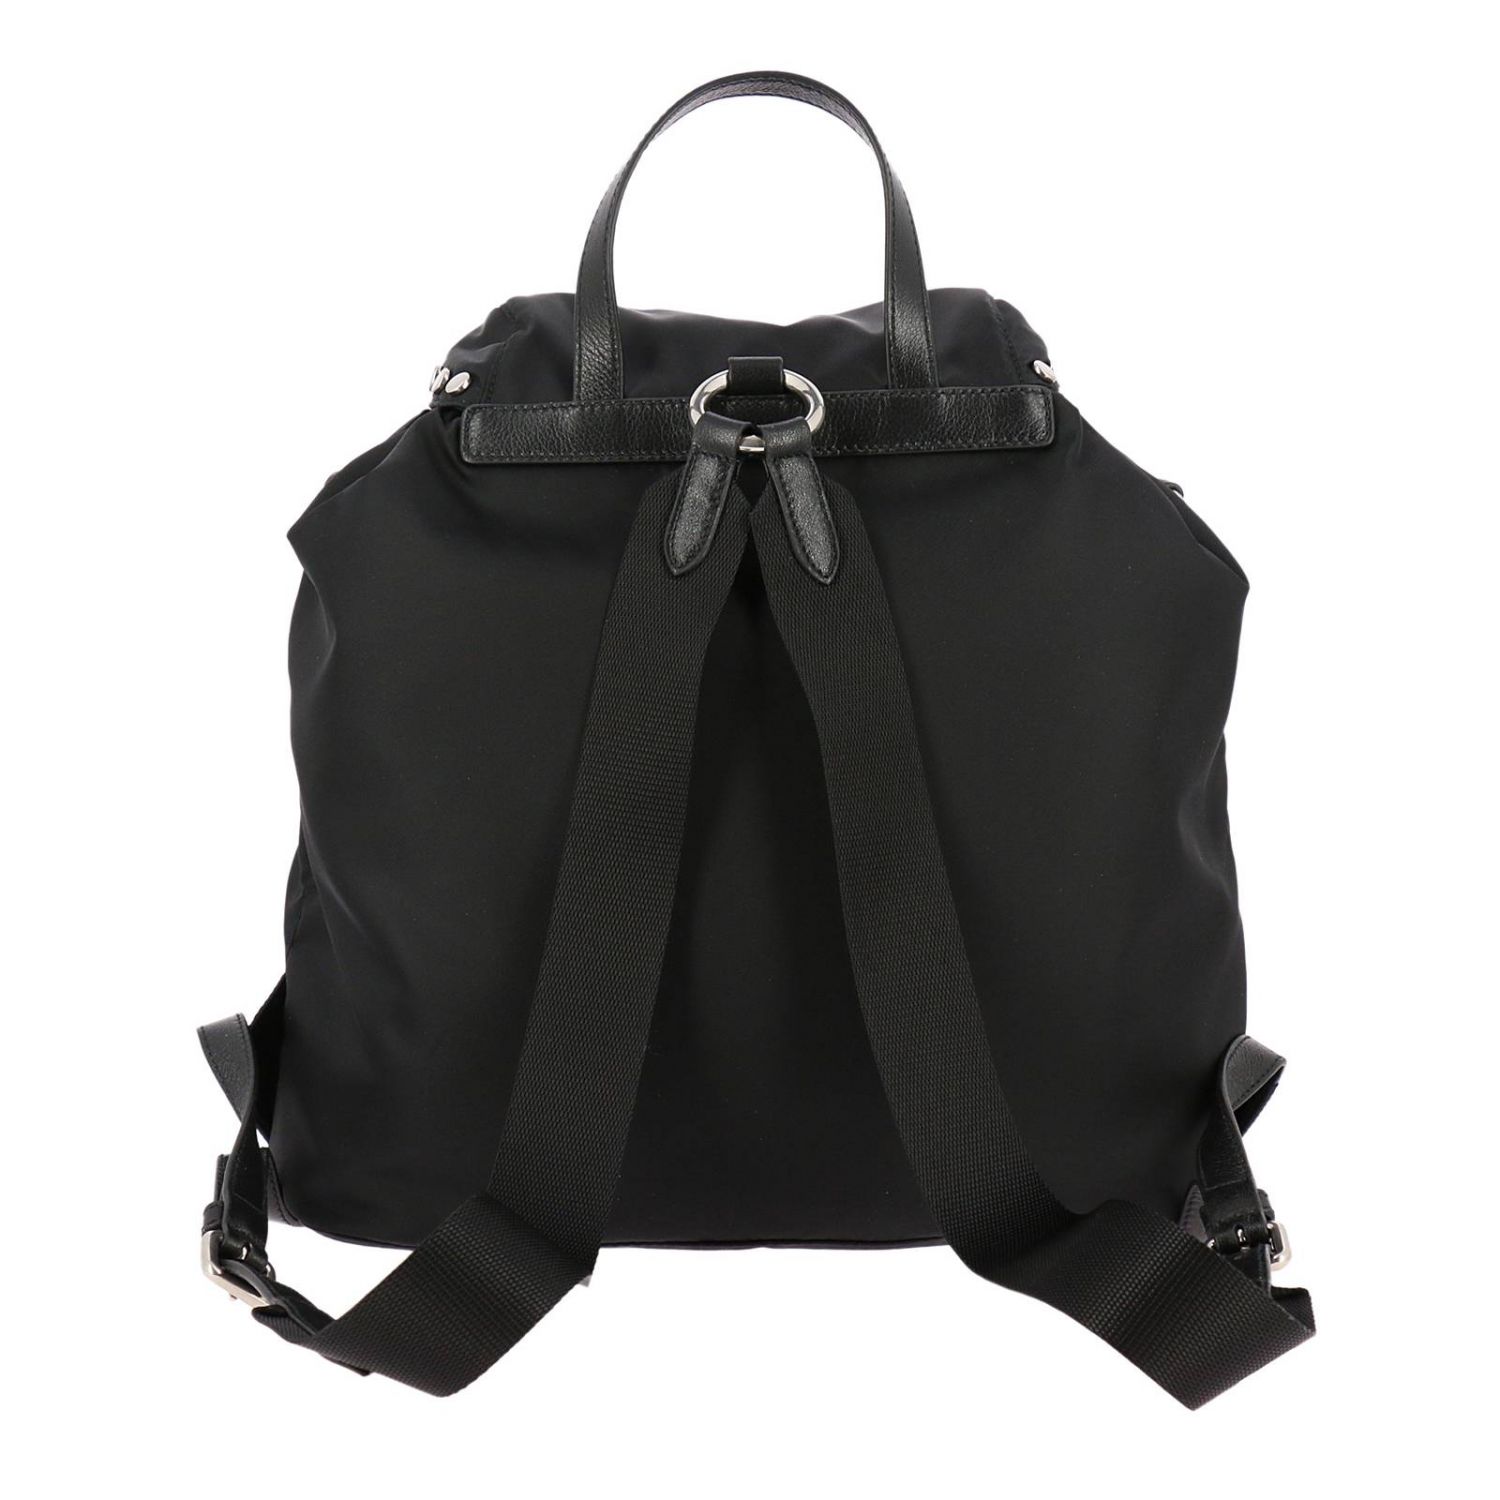 PRADA: Etiquette nylon backpack with logo and metal studs | Backpack ...